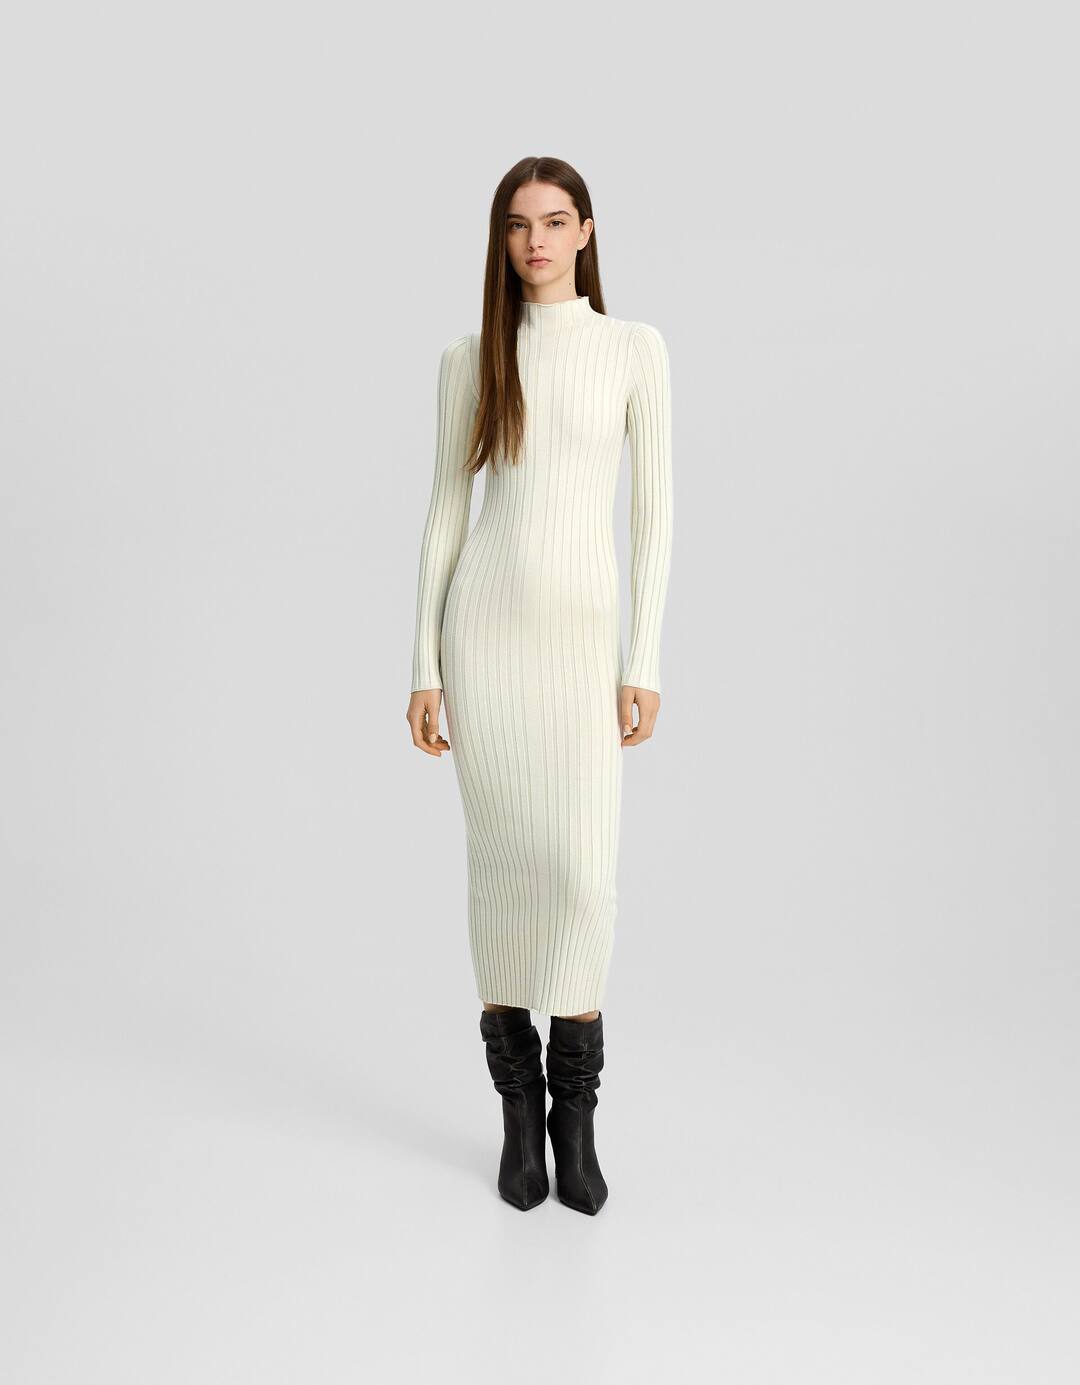 Ribbed knit midi dress with high neck